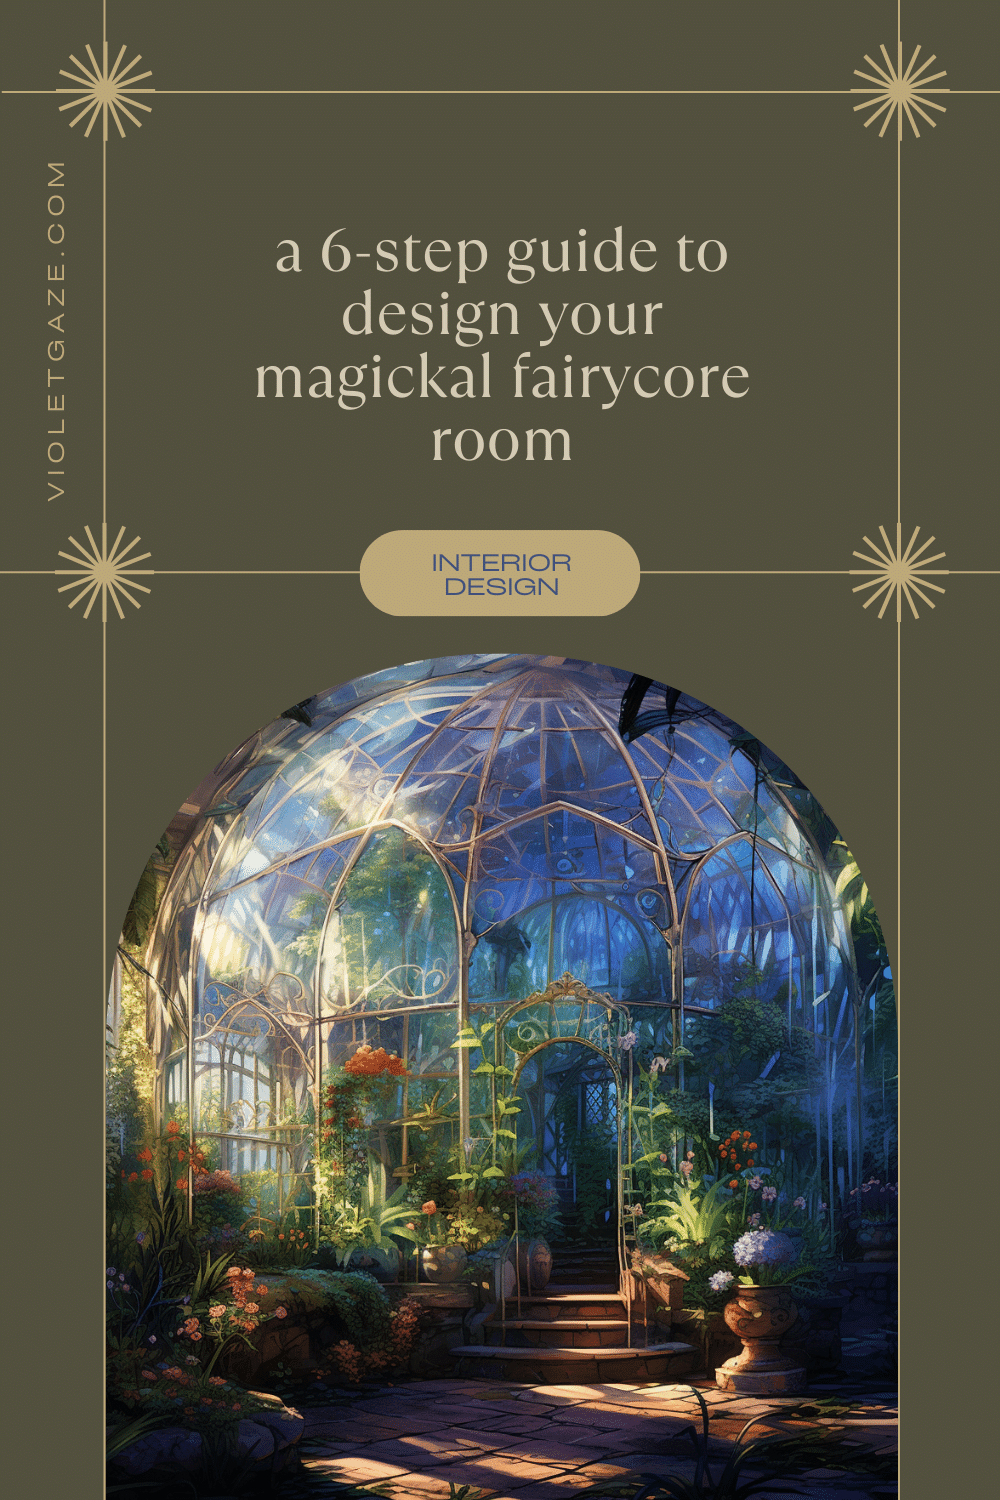 6 step guide to design your magickal fairycore room